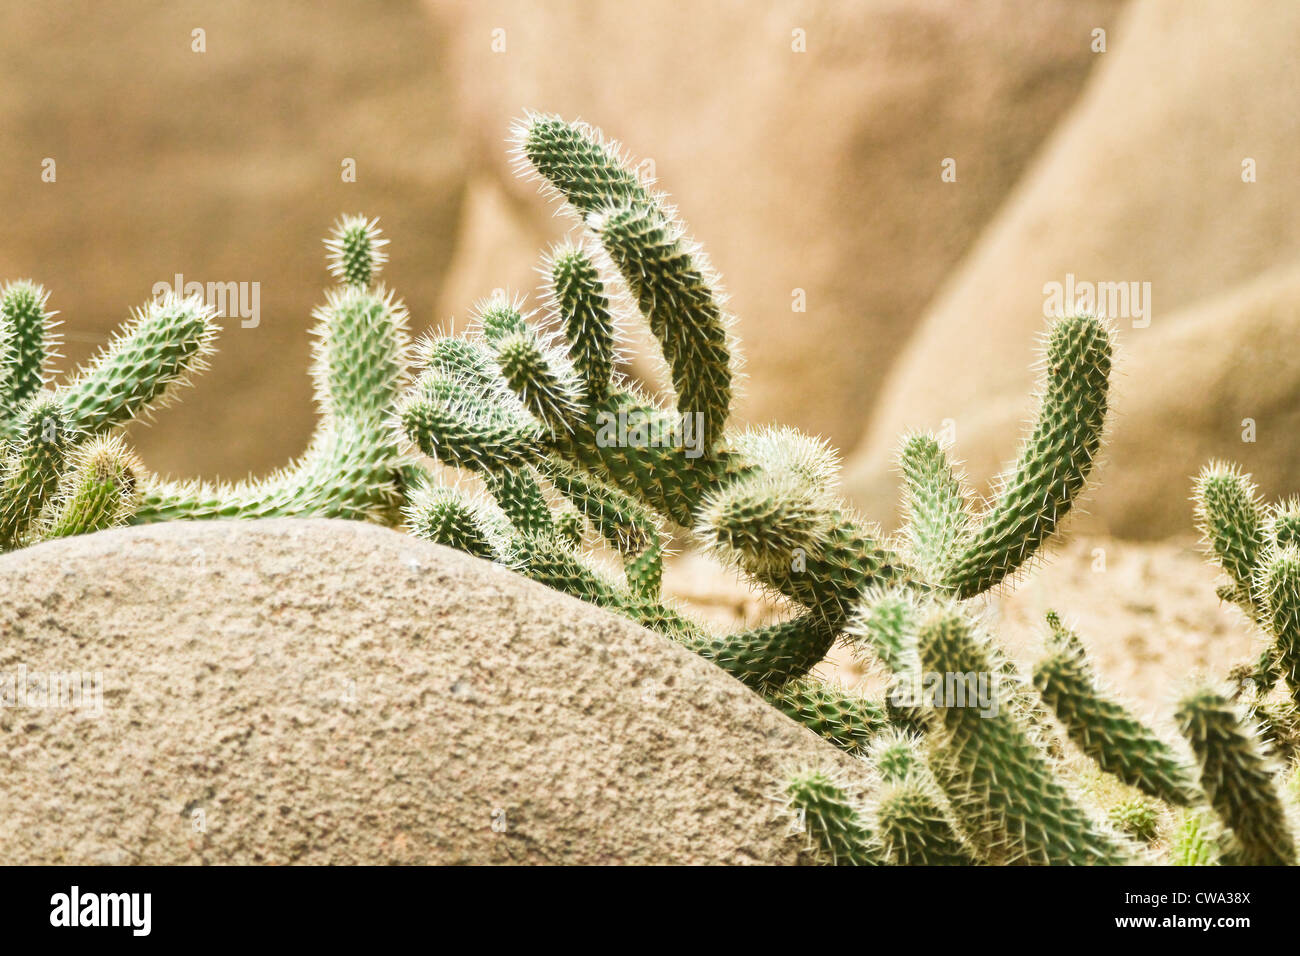 Big Cactus growing in rocky and dry environment Stock Photo